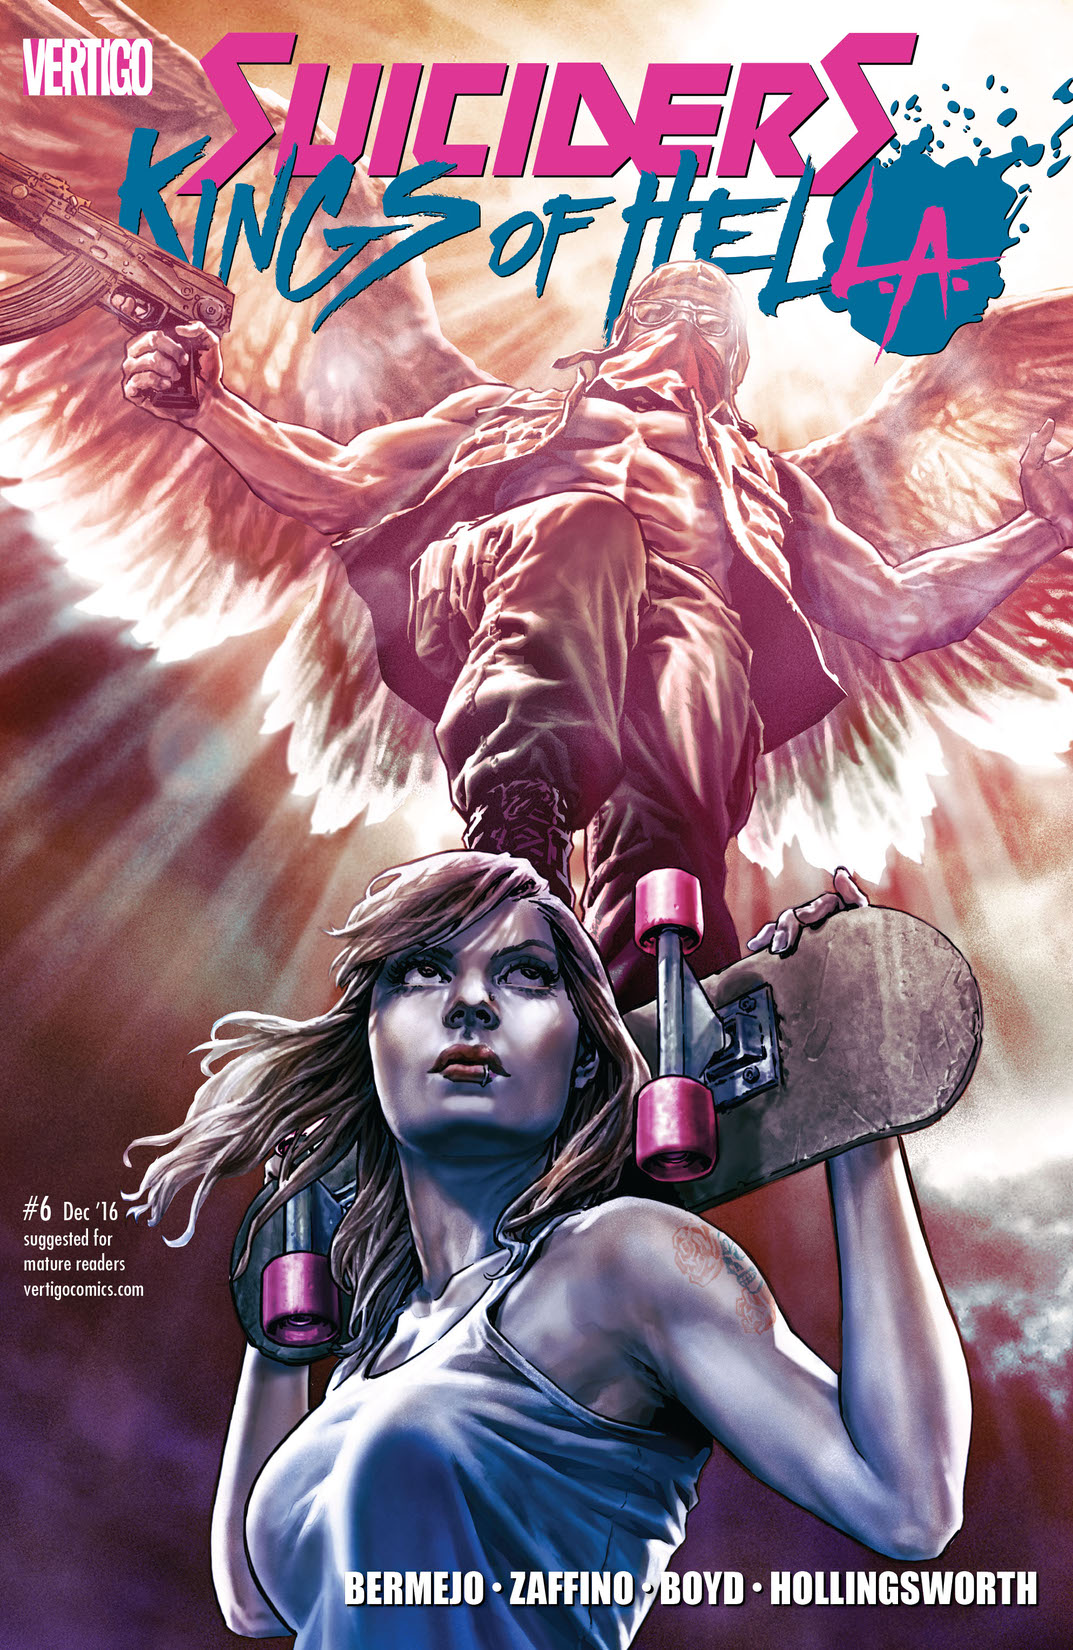 Suiciders: Kings of HelL.A. #6 preview images